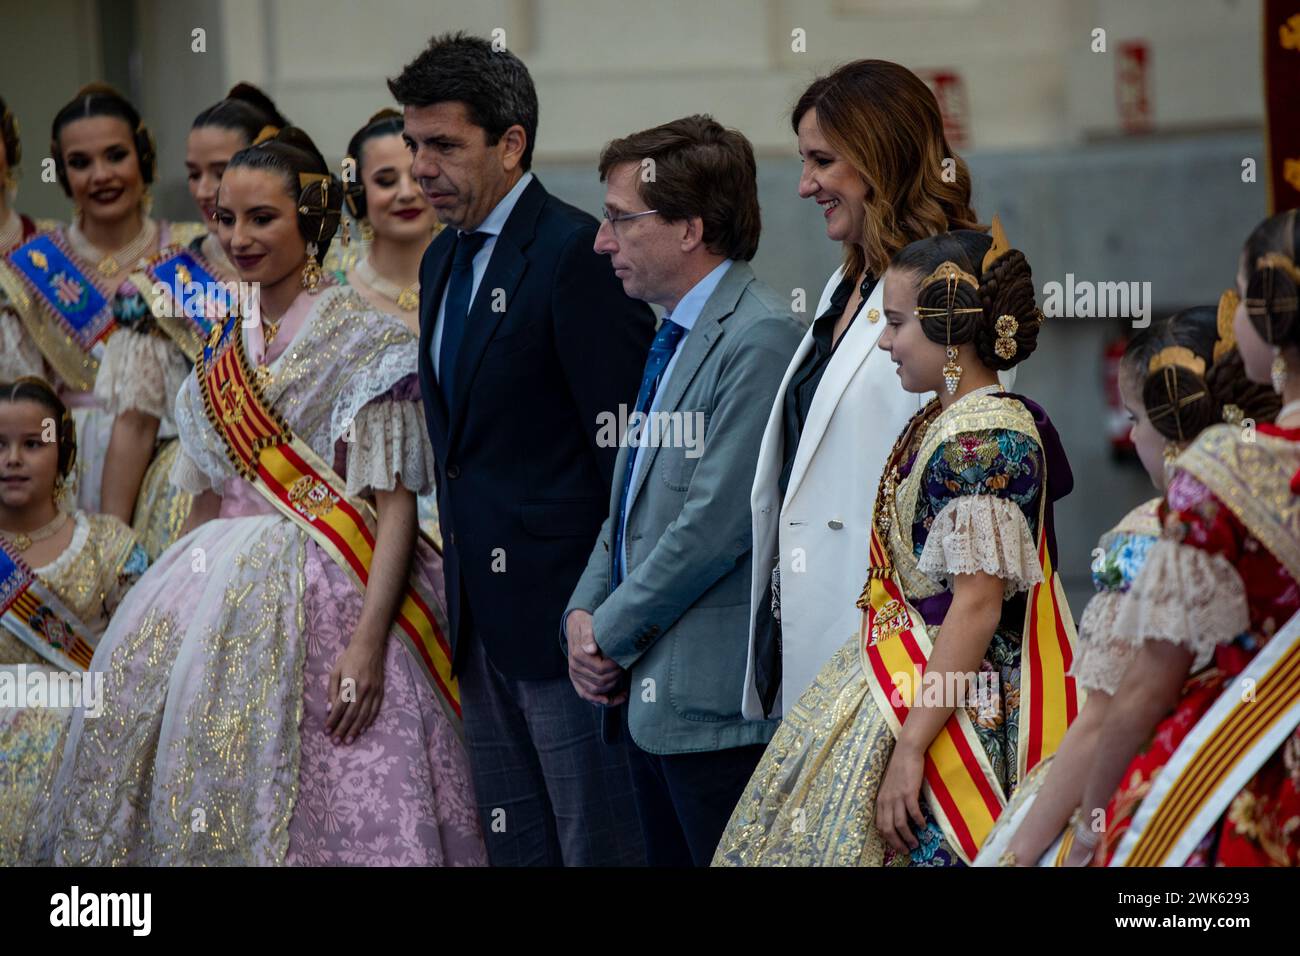 The mayor of Madrid, Jose Luis Martinez - Almeida (C) The president of the Valencian Generalitat, Carlos Mazón (L) and the mayor of Valencia, María José Catalá (R) seen during an official event at the Cibeles Palace. Madrid has held a Mascleta at the Madrid Río Park area where more than 300 kilos of explosives have been detonated.Previously at the Cibeles Palace, headquarters of the Madrid city council, an official event was held to welcome the Valencian delegation with the participation of the mayor of Madrid, Jose Luis Martínez - Almeida; the president of the Valencian Generalitat, Carlos Ma Stock Photo